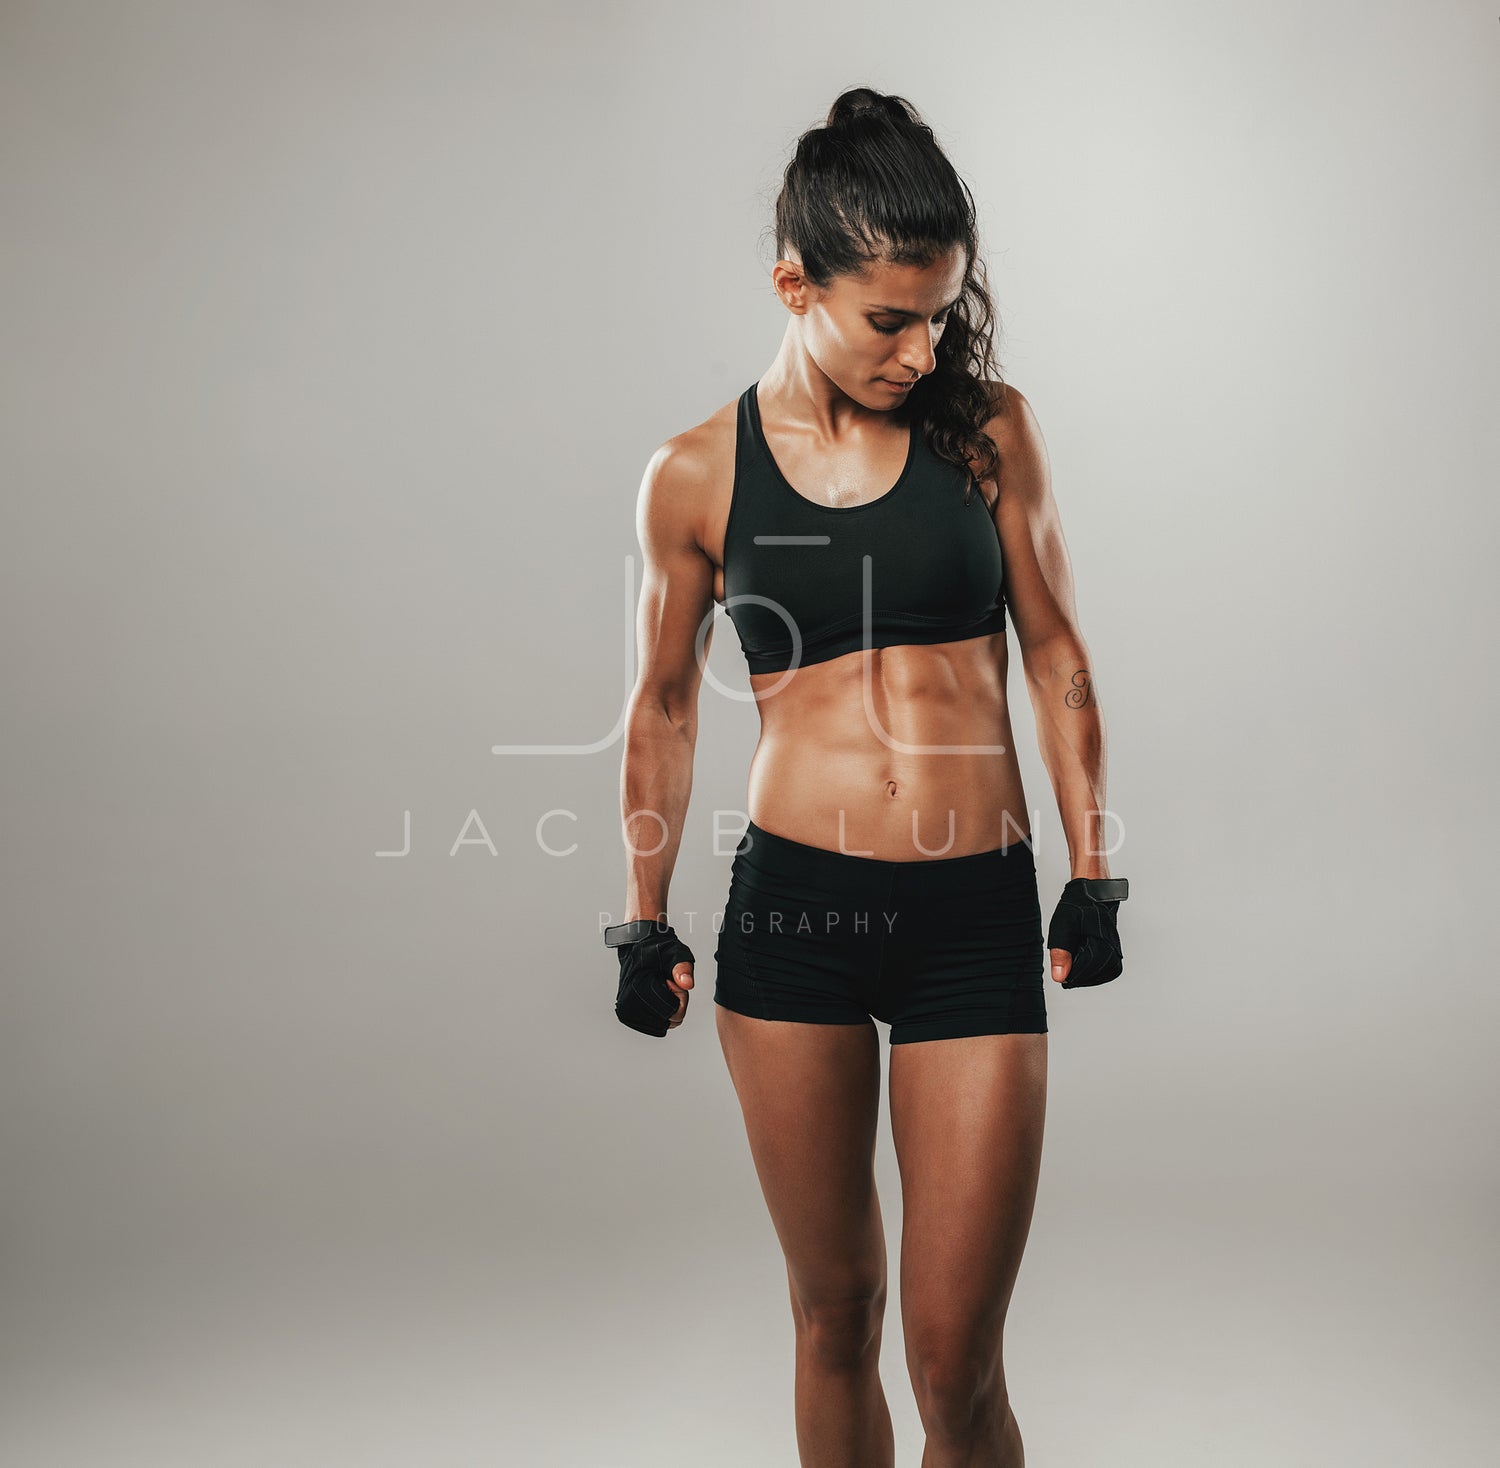 Strong Athletic Woman Image & Photo (Free Trial)